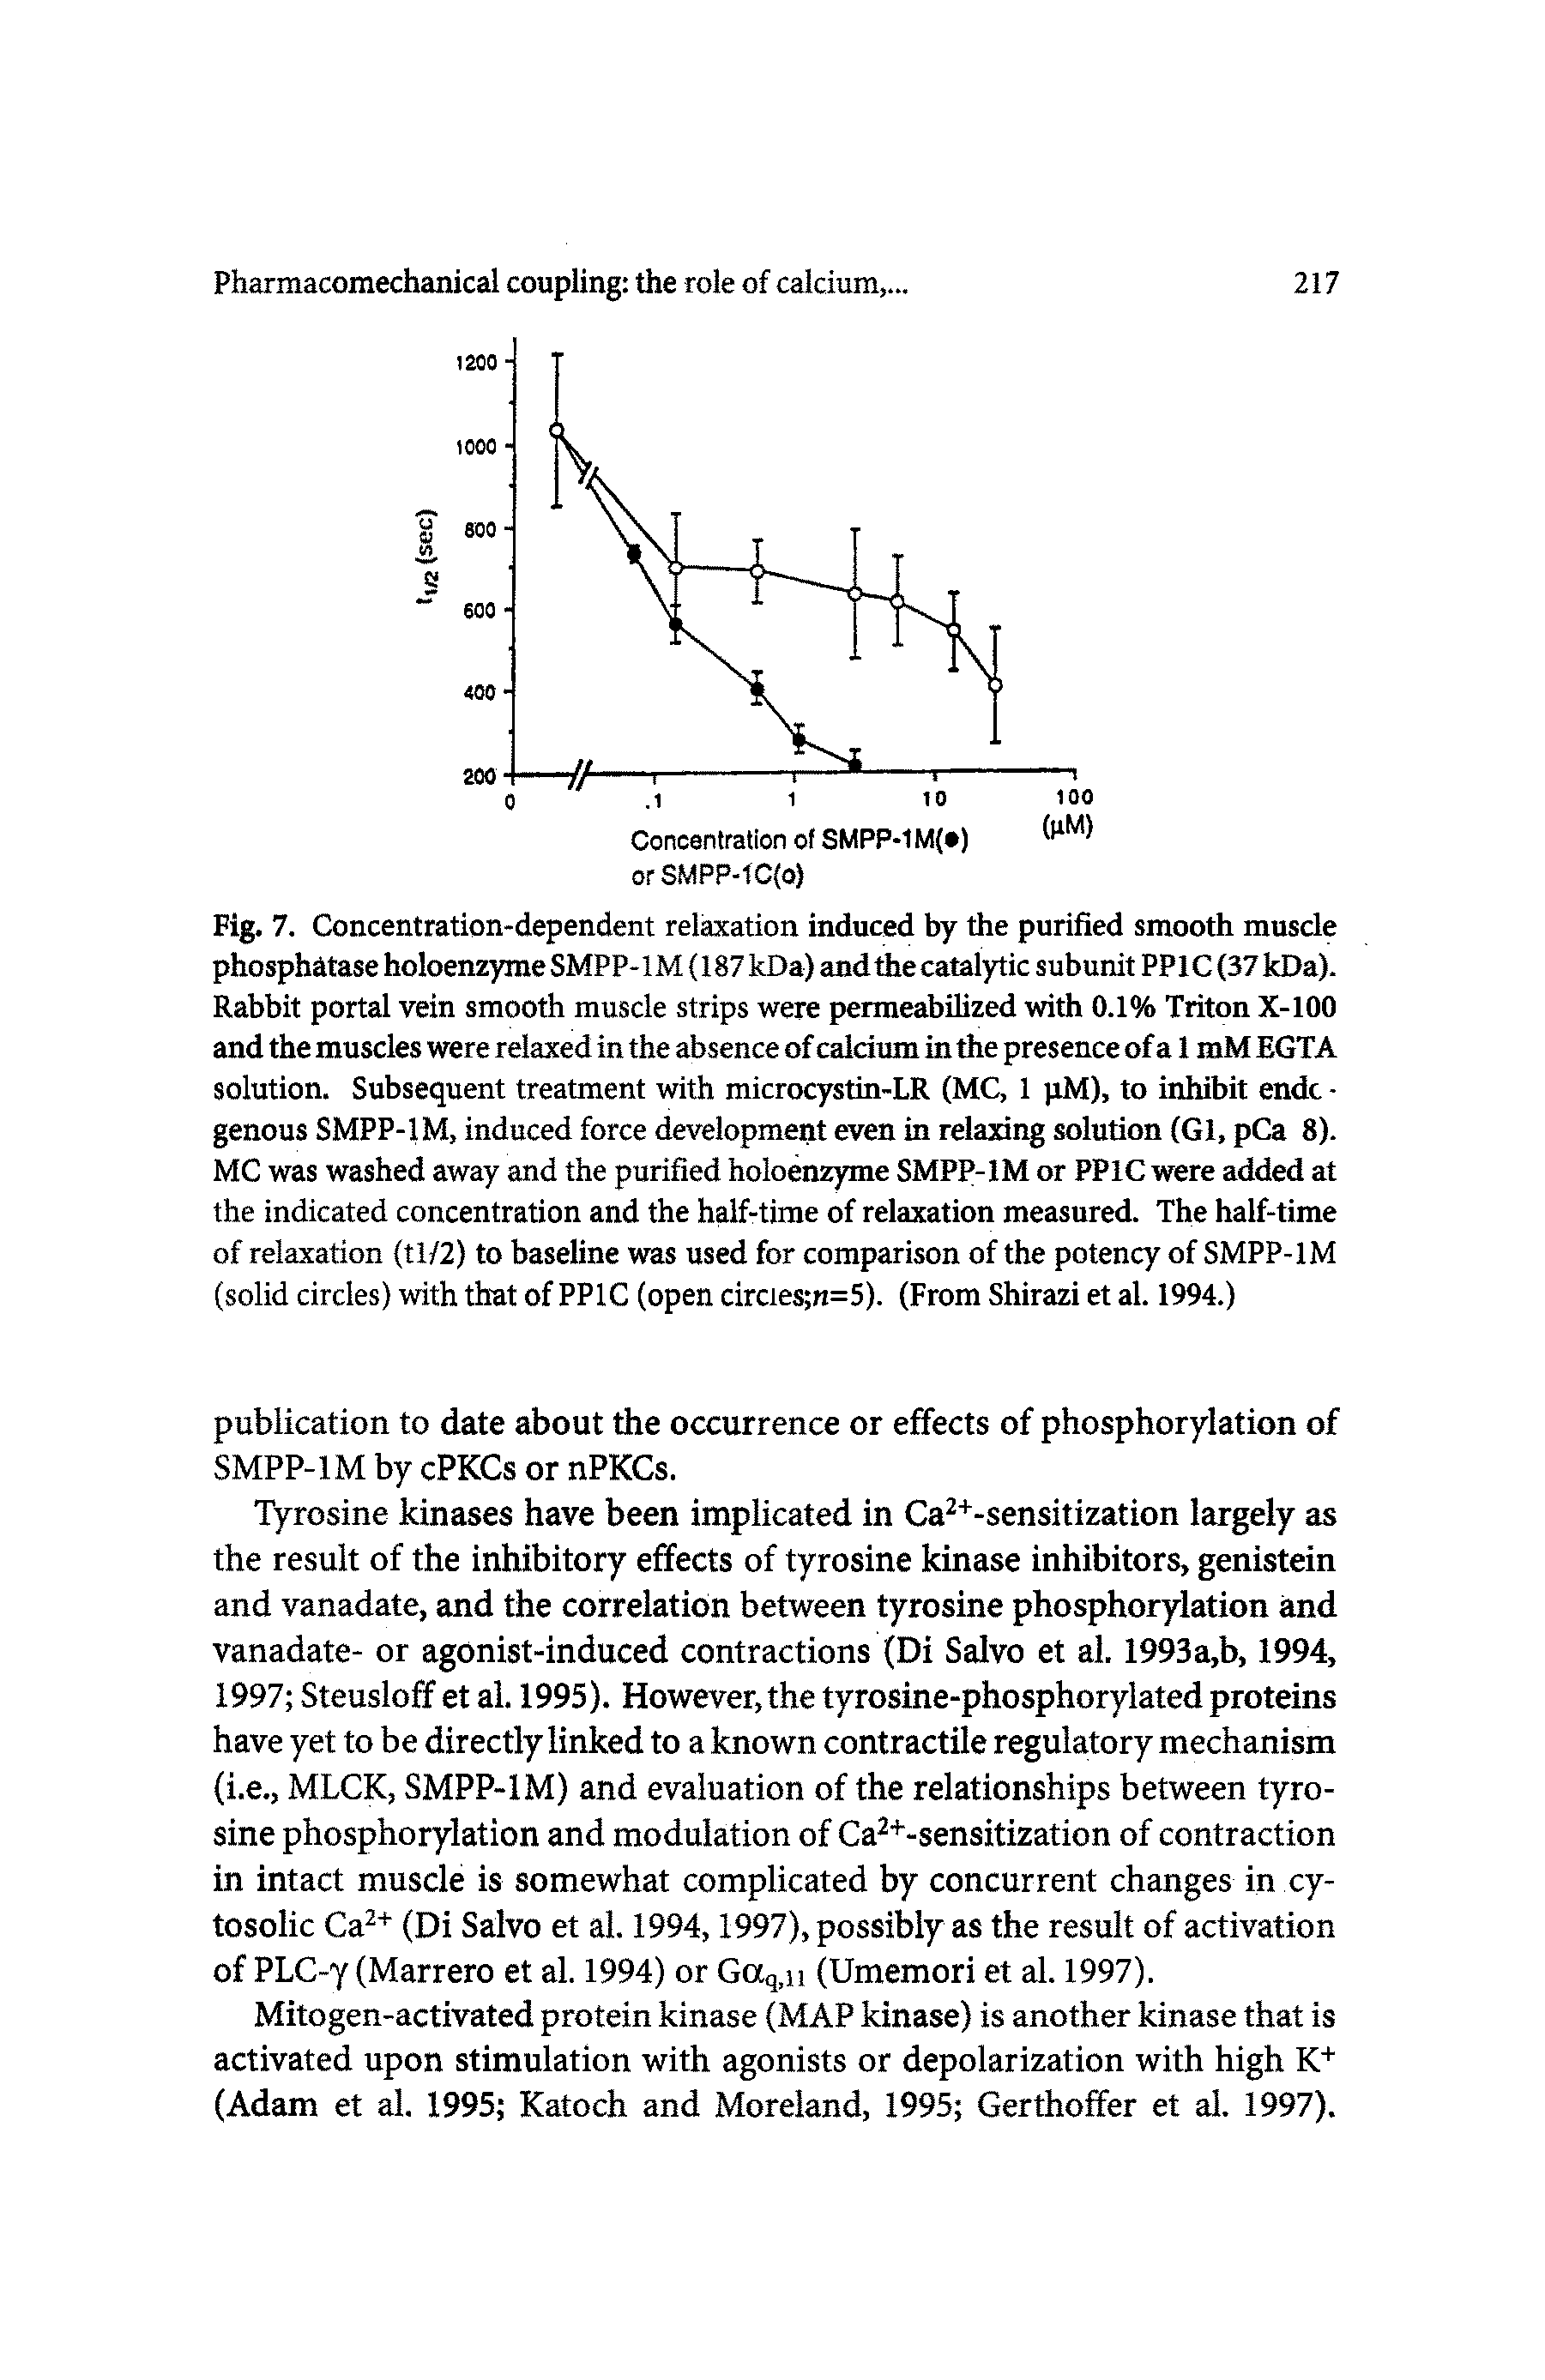 Fig. 7. Concentration-dependent relaxation induced by the purified smooth muscle phosphatase holoenzyme SMPP-IM (187 kDa) and the catalytic subunit PPIC (37 kDa). Rabbit portal vein smooth muscle strips were permeabilized with 0.1% Triton X-100 and the muscles were relaxed in the absence of calcium in the presence of a 1 mM EGTA solution. Subsequent treatment with microcystin-LR (MC, 1 jiM), to inhibit endc genous SMPP-IM, induced force development even in relaxing solution (Gl, pCa 8). MC was washed away and the purified holoenzyme SMPP-IM or PPIC were added at the indicated concentration and the half-time of relaxation measured. The half-time of relaxation (tl/2) to baseline was used for comparison of the potency of SMPP-IM (solid circles) with that of PPIC (open circies n=5). (From Shirazi et al. 1994.)...